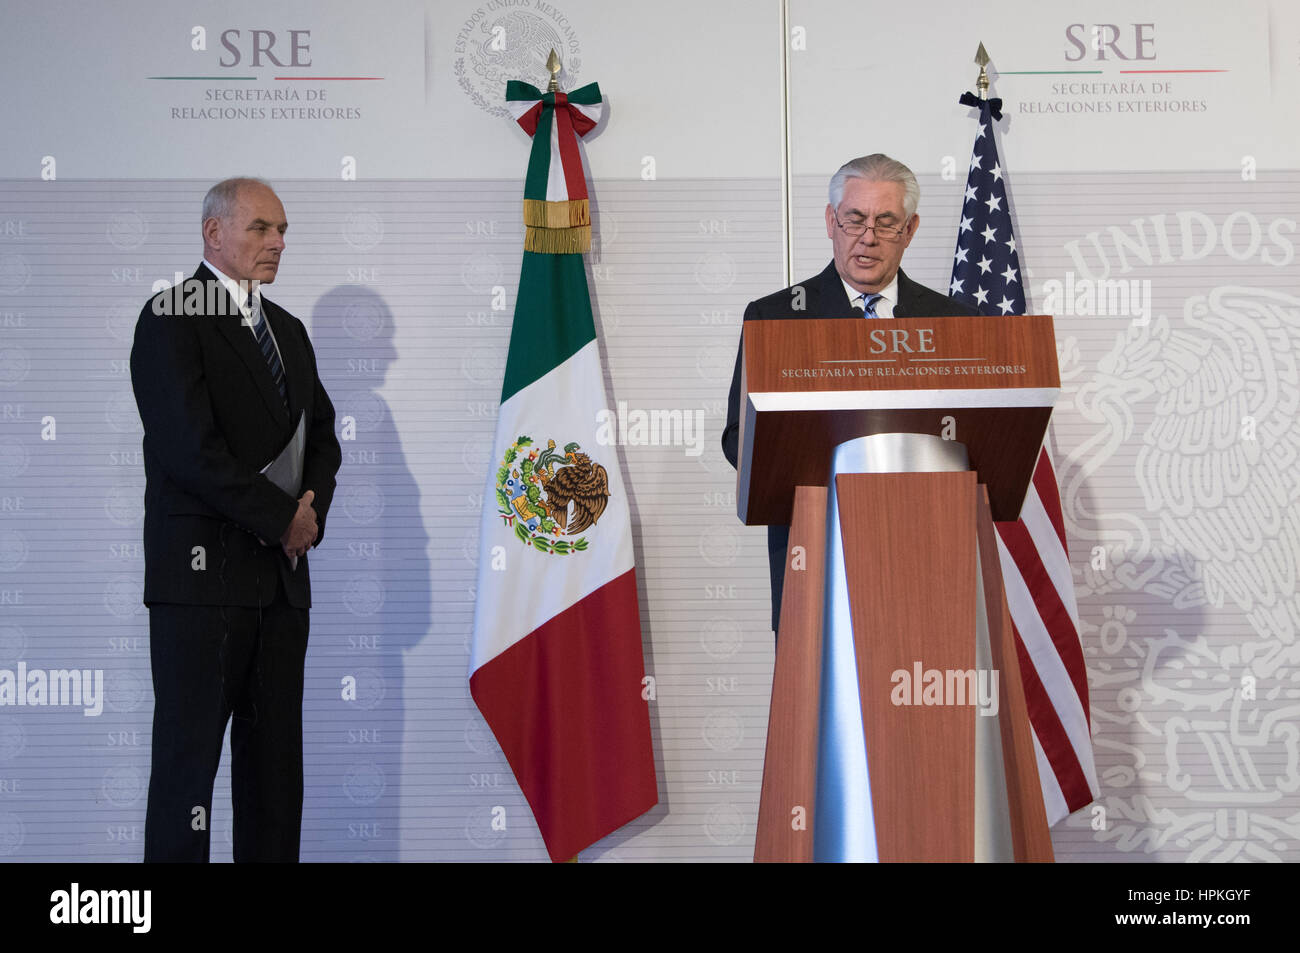 Mexico City, Mexico. 23rd Feb, 2017. U.S. Secretary of State Rex Tillerson(R), along with U.S. Secretary of Homeland Security John Kelly(L), attends a press conference in Mexico City, capital of Mexico, on Feb. 23, 2017. Top U.S. envoys on a working visit to Mexico on Thursday tried to allay fears that their government was preparing to massively deport undocumented migrants back across the border. Credit: Francisco Canedo/Xinhua/Alamy Live News Stock Photo